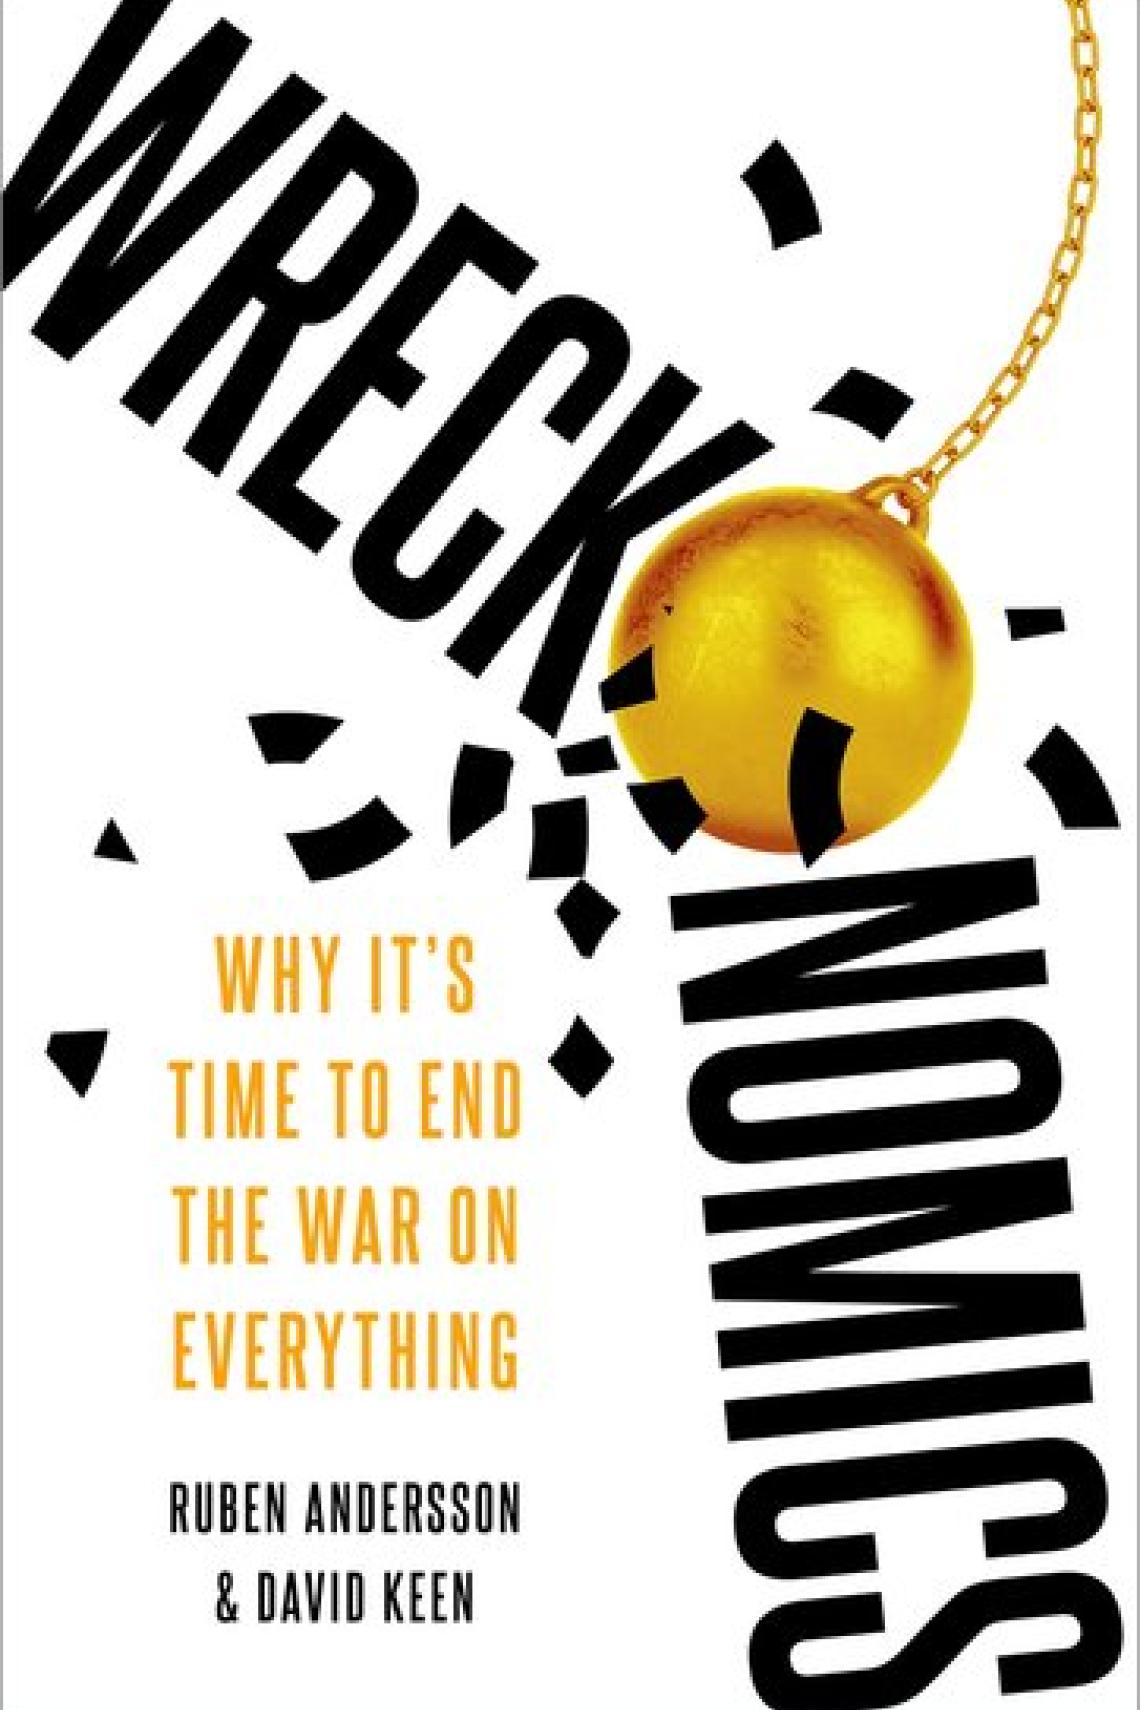 Book cover with the words Wreckonomics - why it's time to end the war on everything